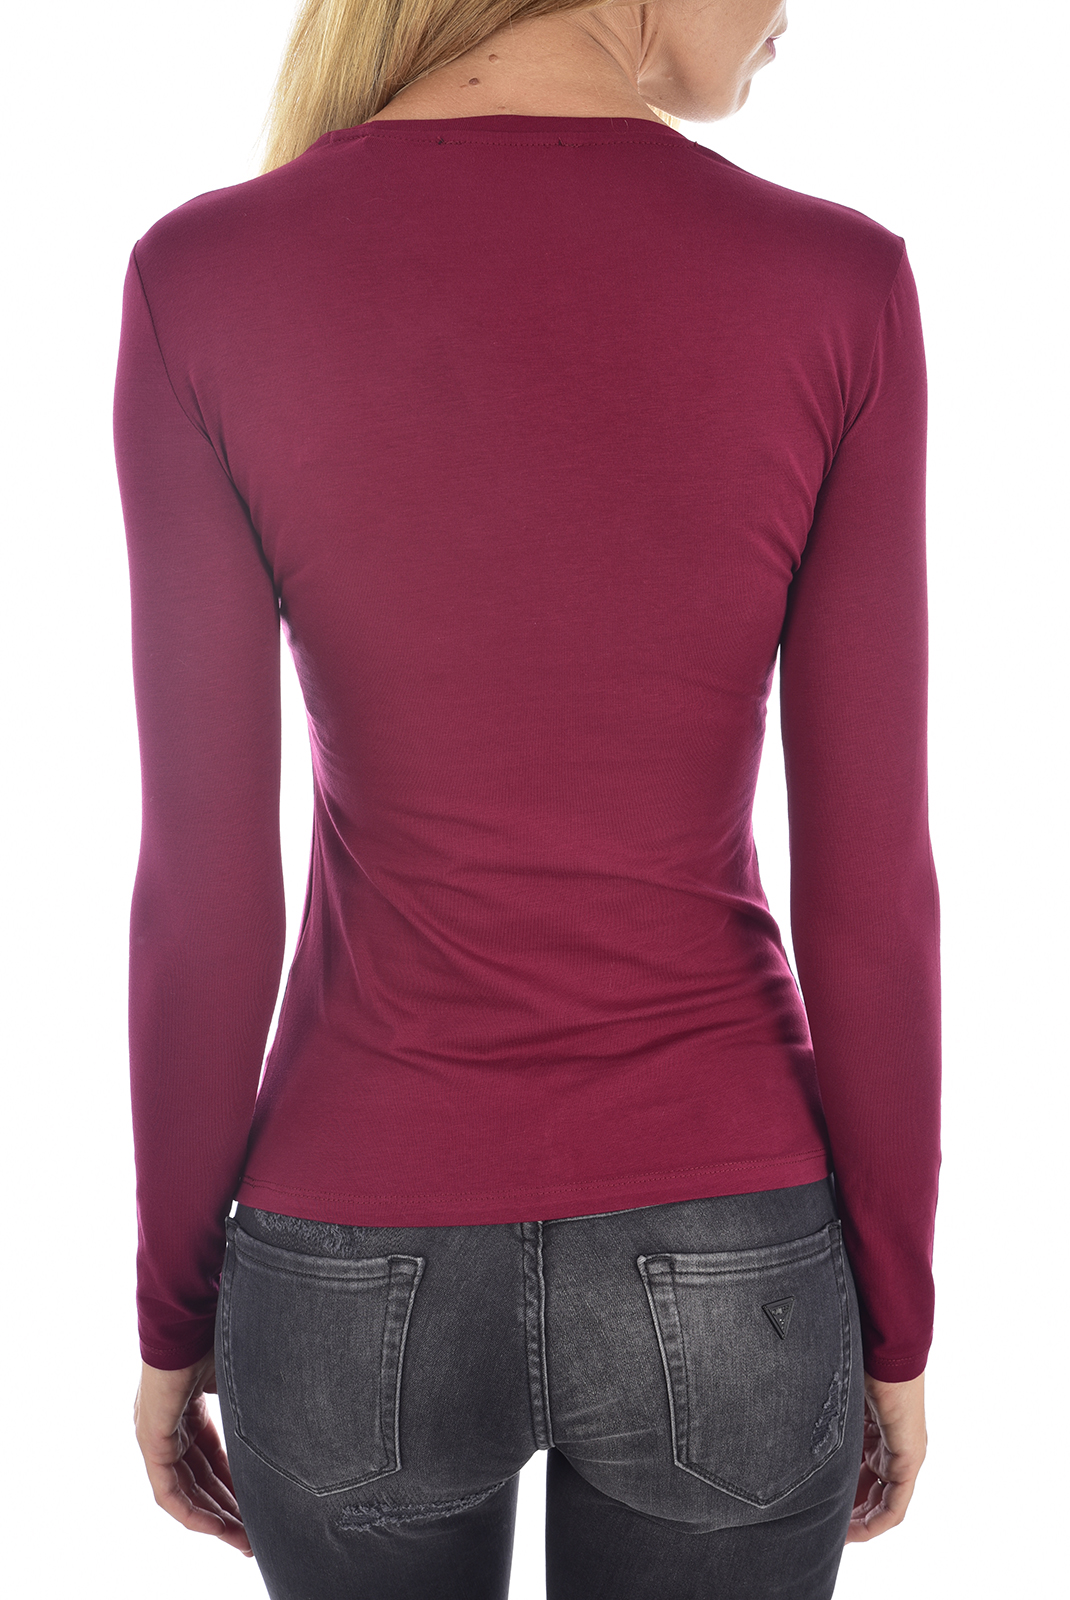 Tee-shirt rouge femme à manches longues Guess - W94i95